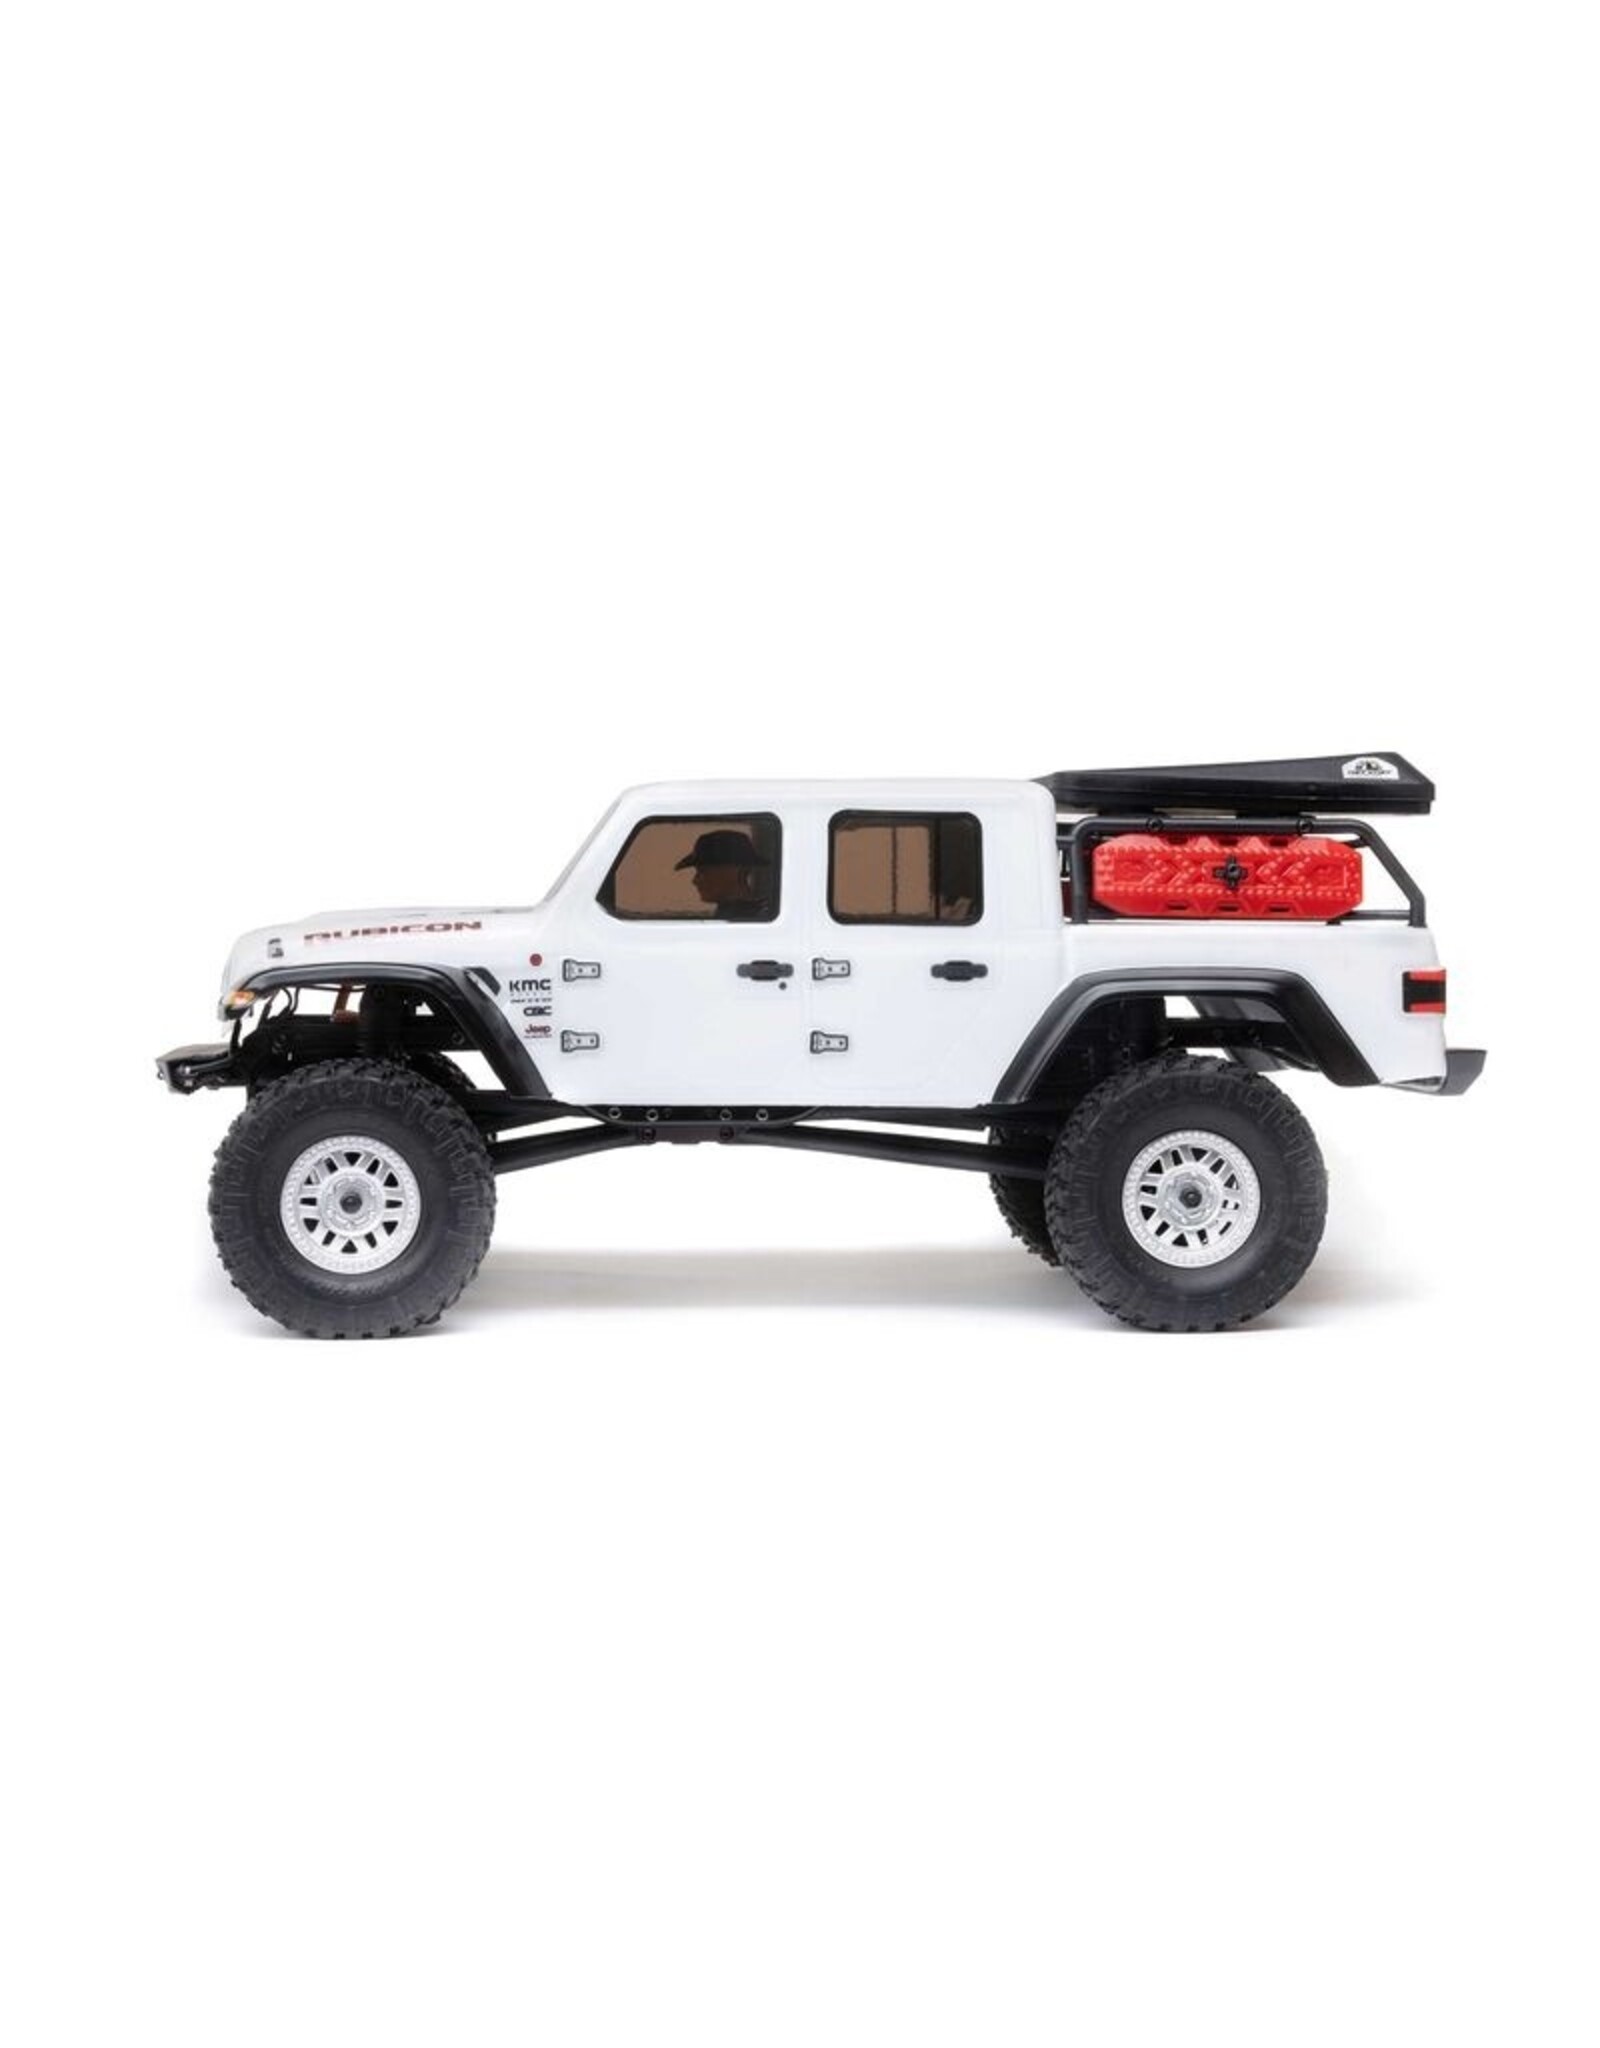 Axial AXI00005V2T4 SCX24 Jeep Gladiator 4WD Rock Crawler RTR, White